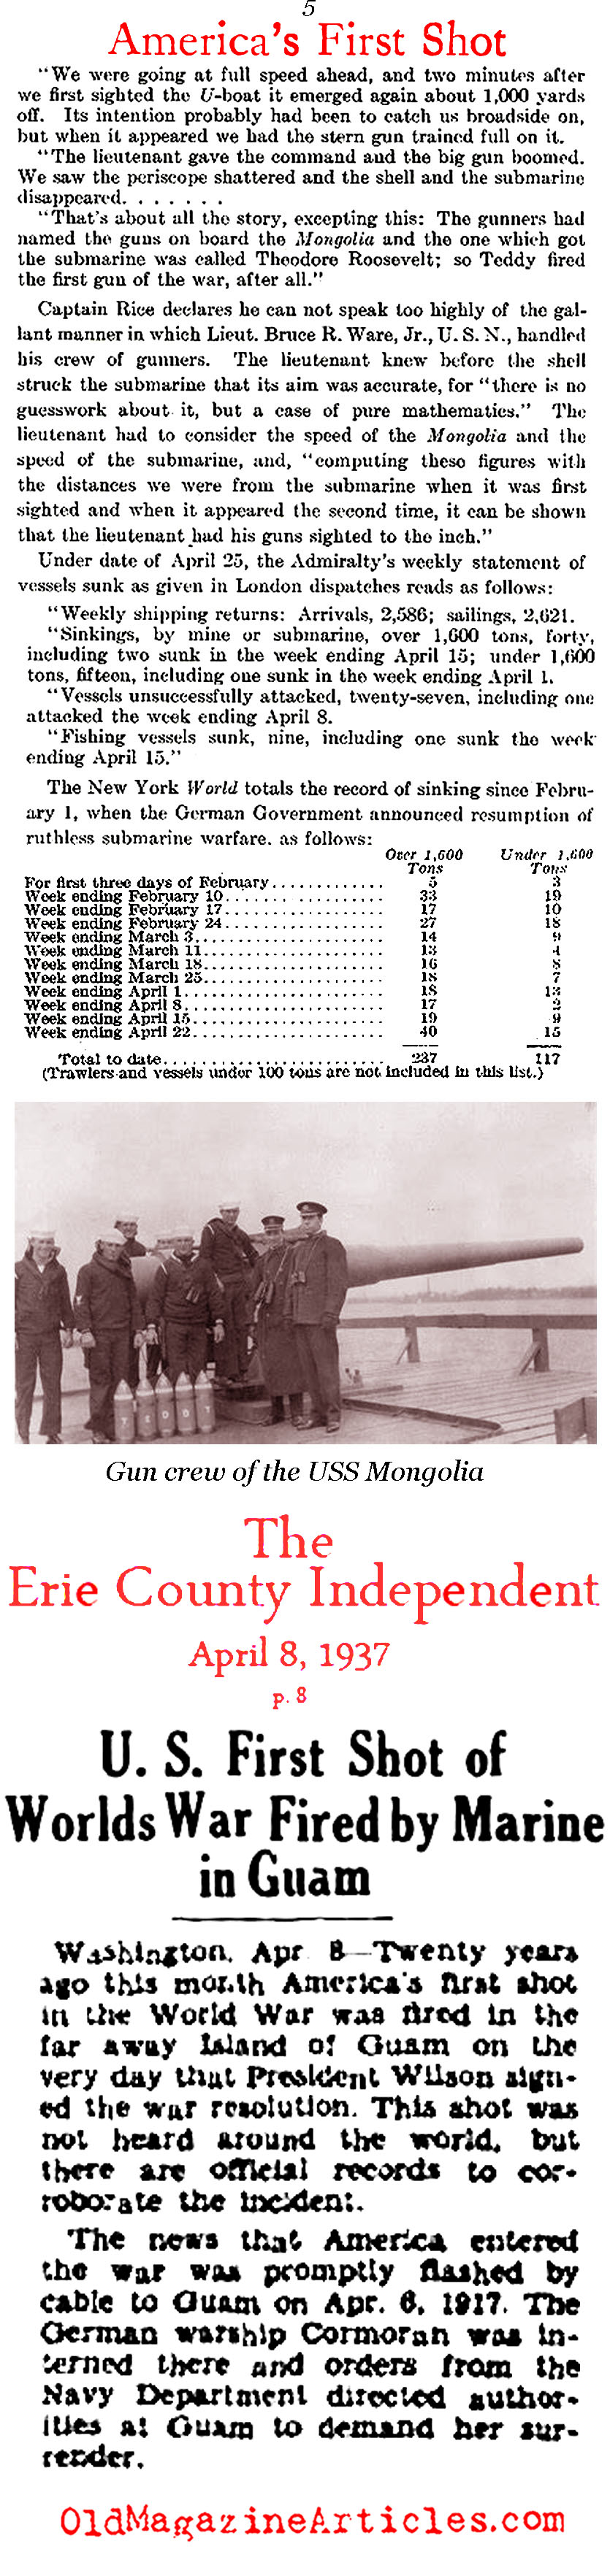 America's First Shot (Various Sources, 1917 - 1937)